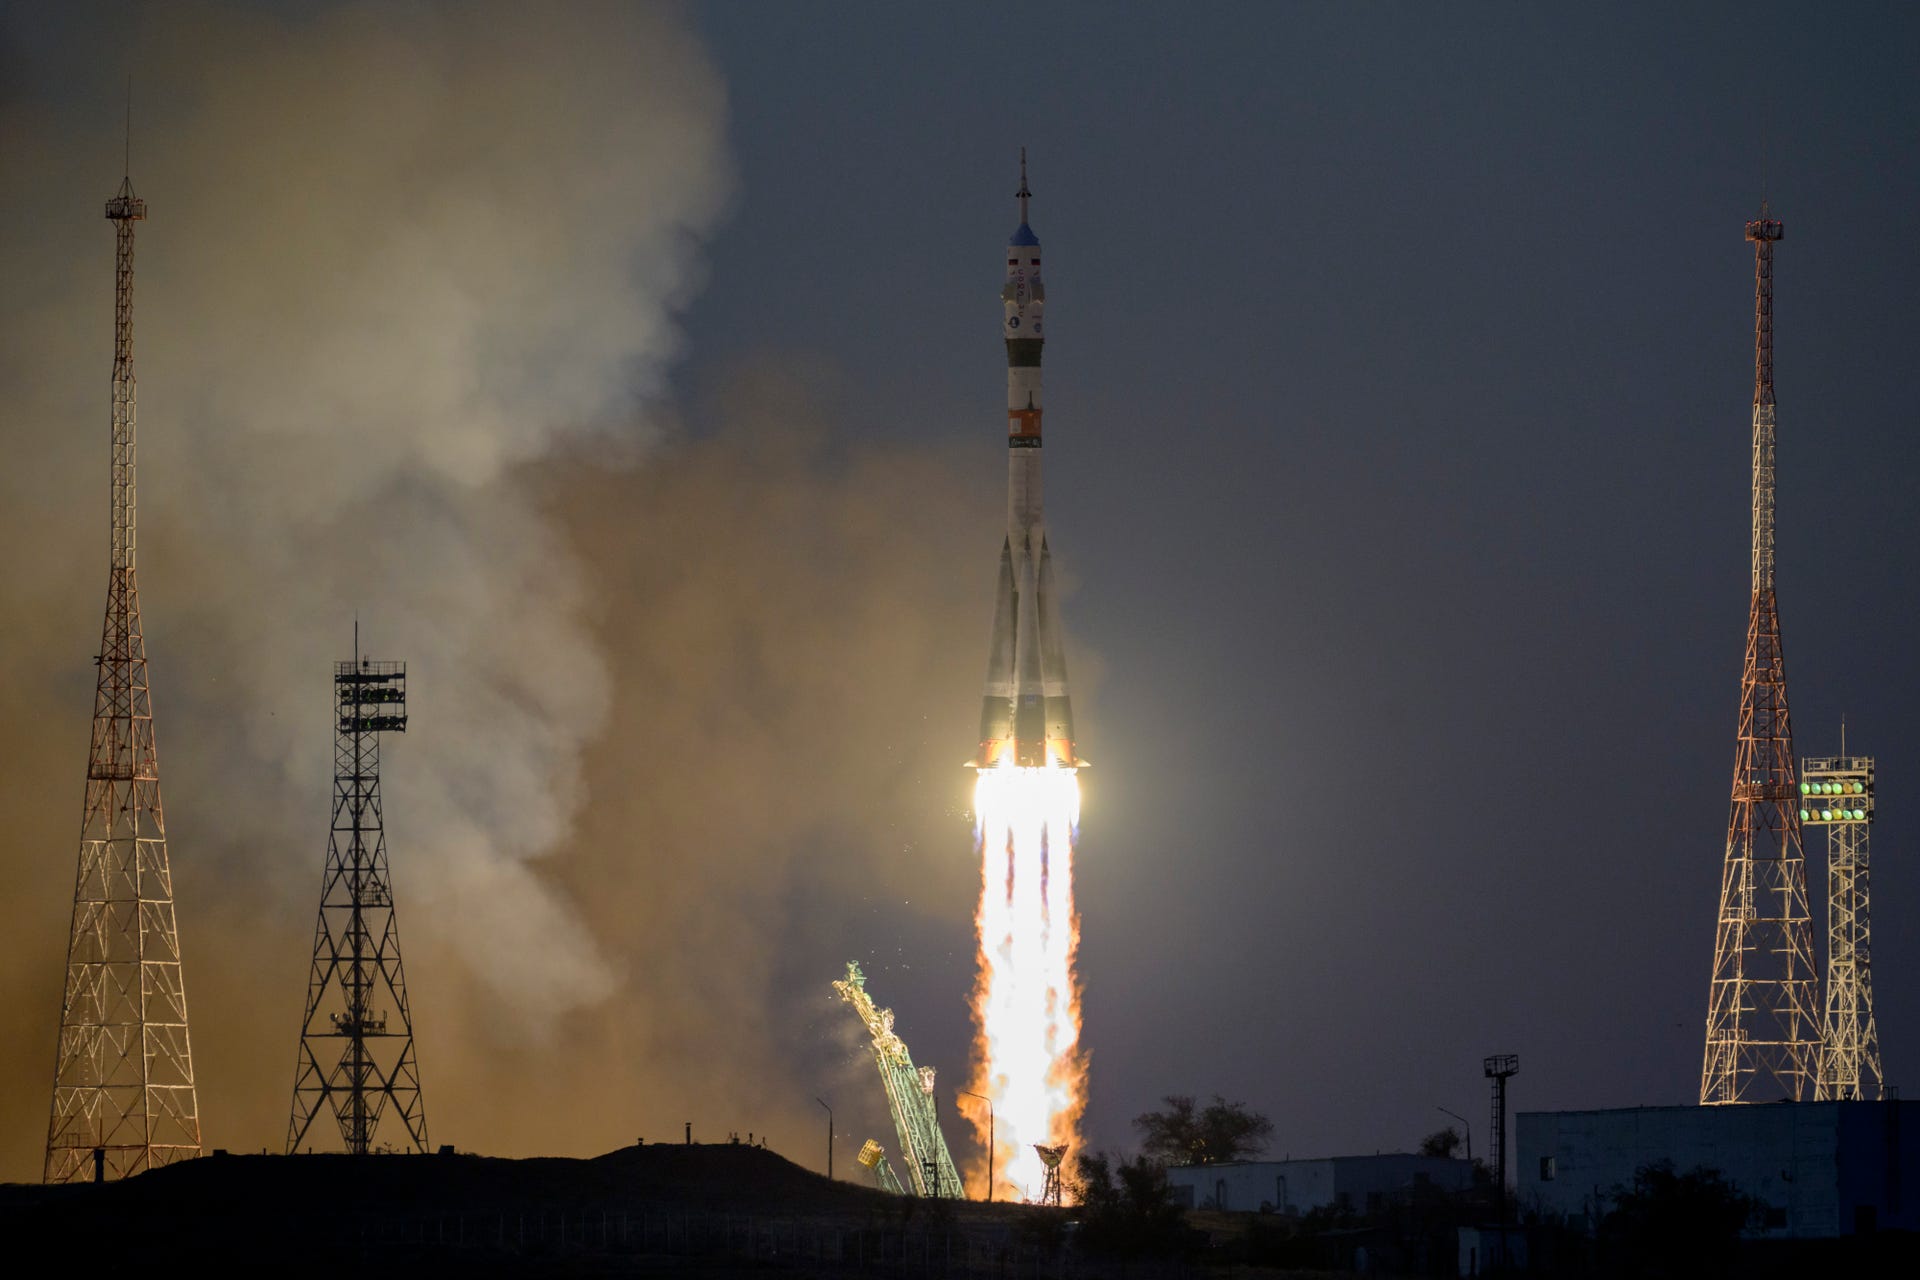 Russian rocket blasts off in a fiery blaze with launch site equipment towers nearby.